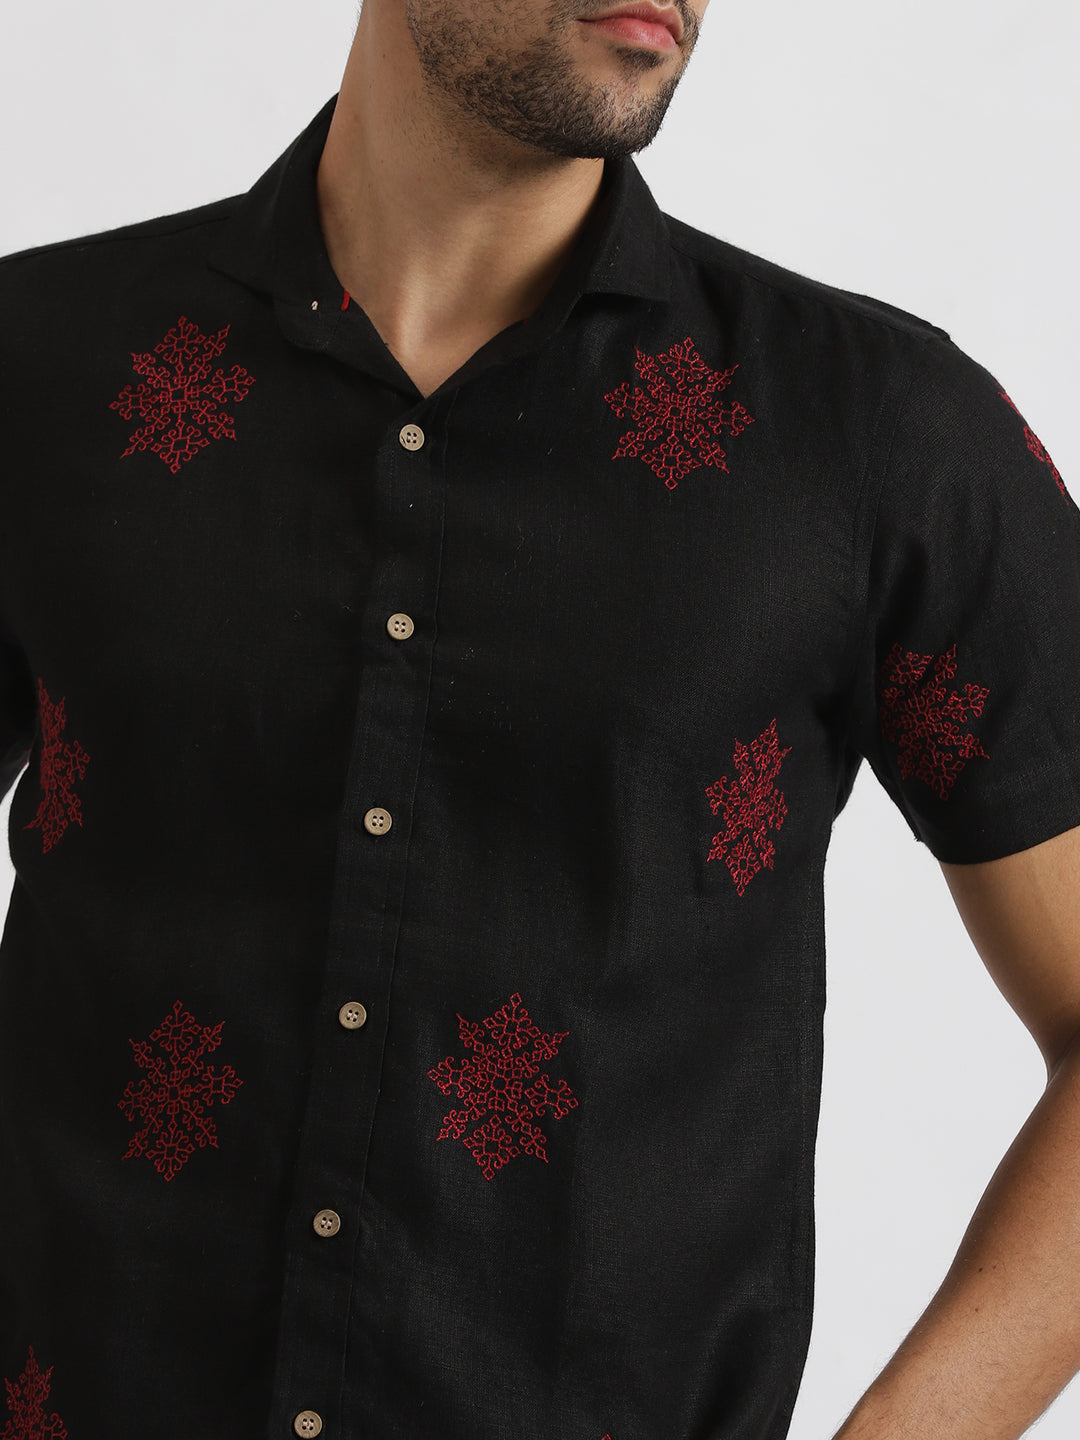 Shane - Pure Linen Embroidered Half Sleeve Shirt - Black & Red